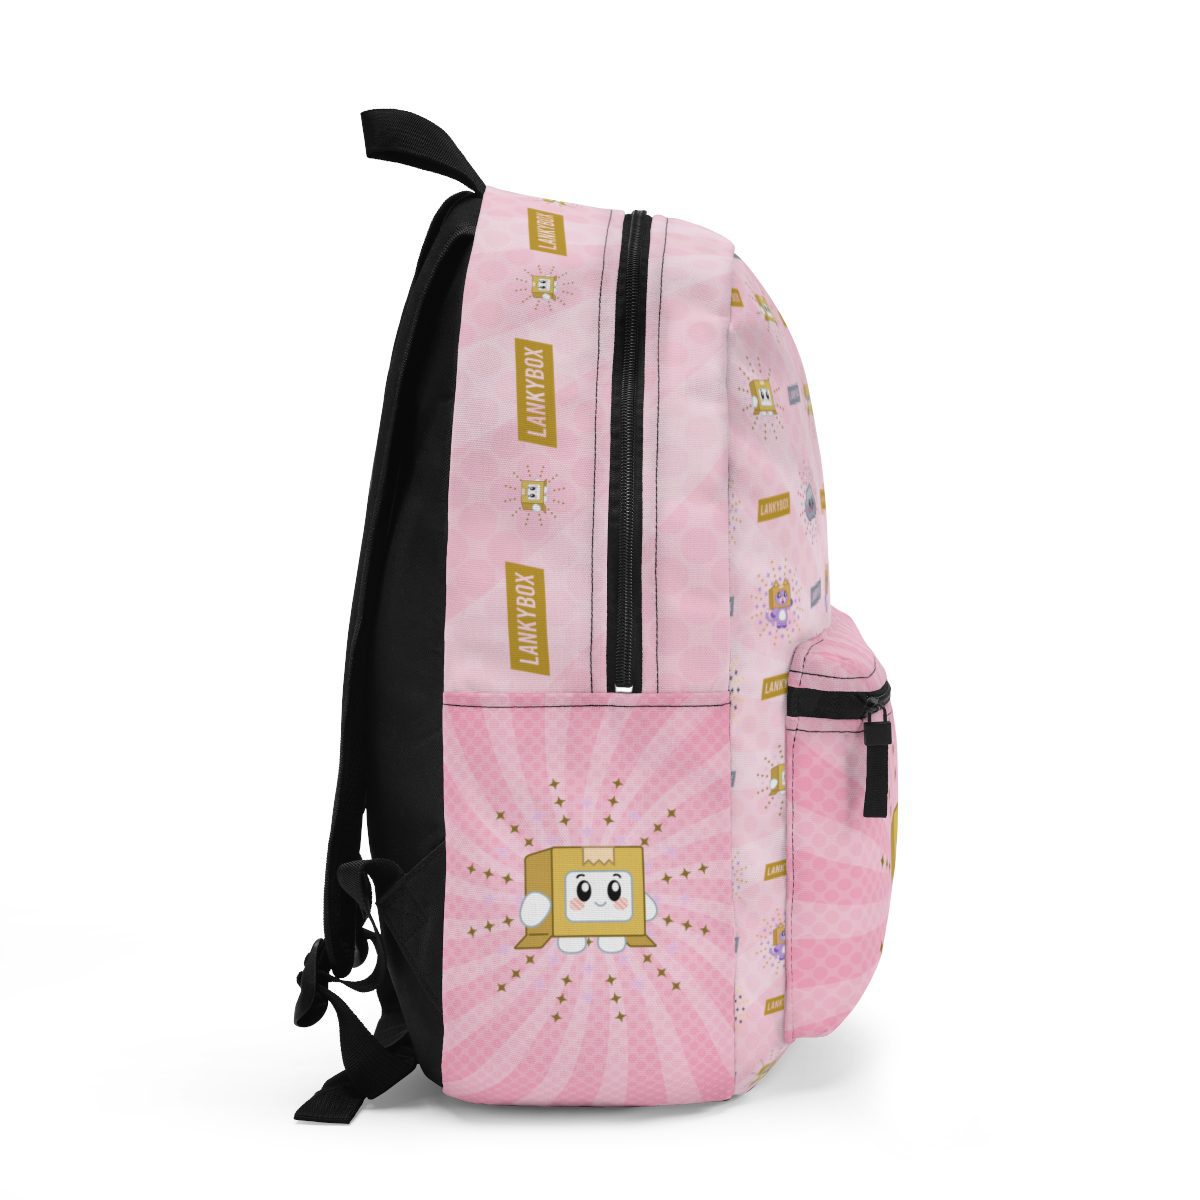 Lankybox Cute Character Boxy on Front Pocket Pink Backpack Cool Kiddo 12